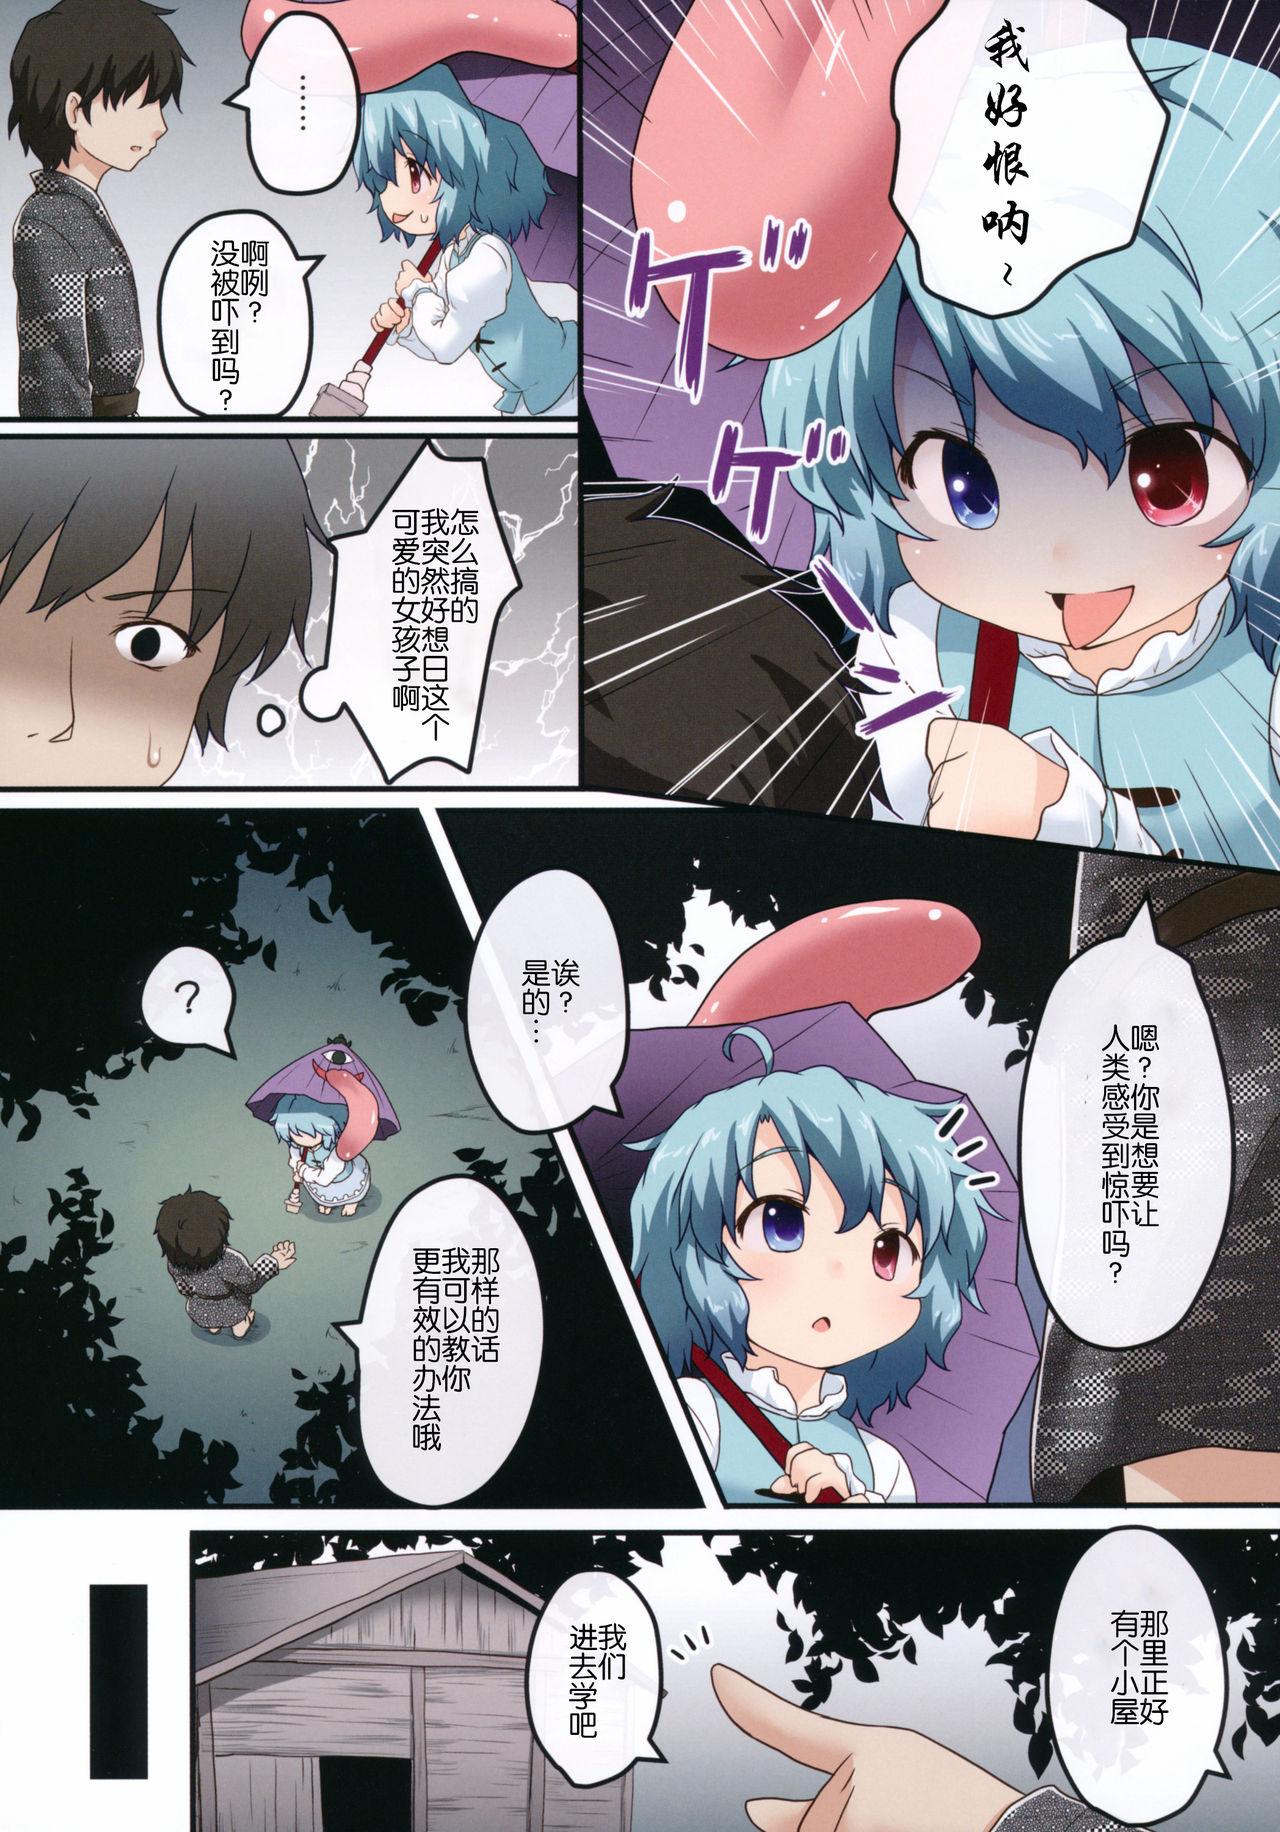 Trimmed Kogasa No Okuchi Lesson! - Touhou project This - Page 4